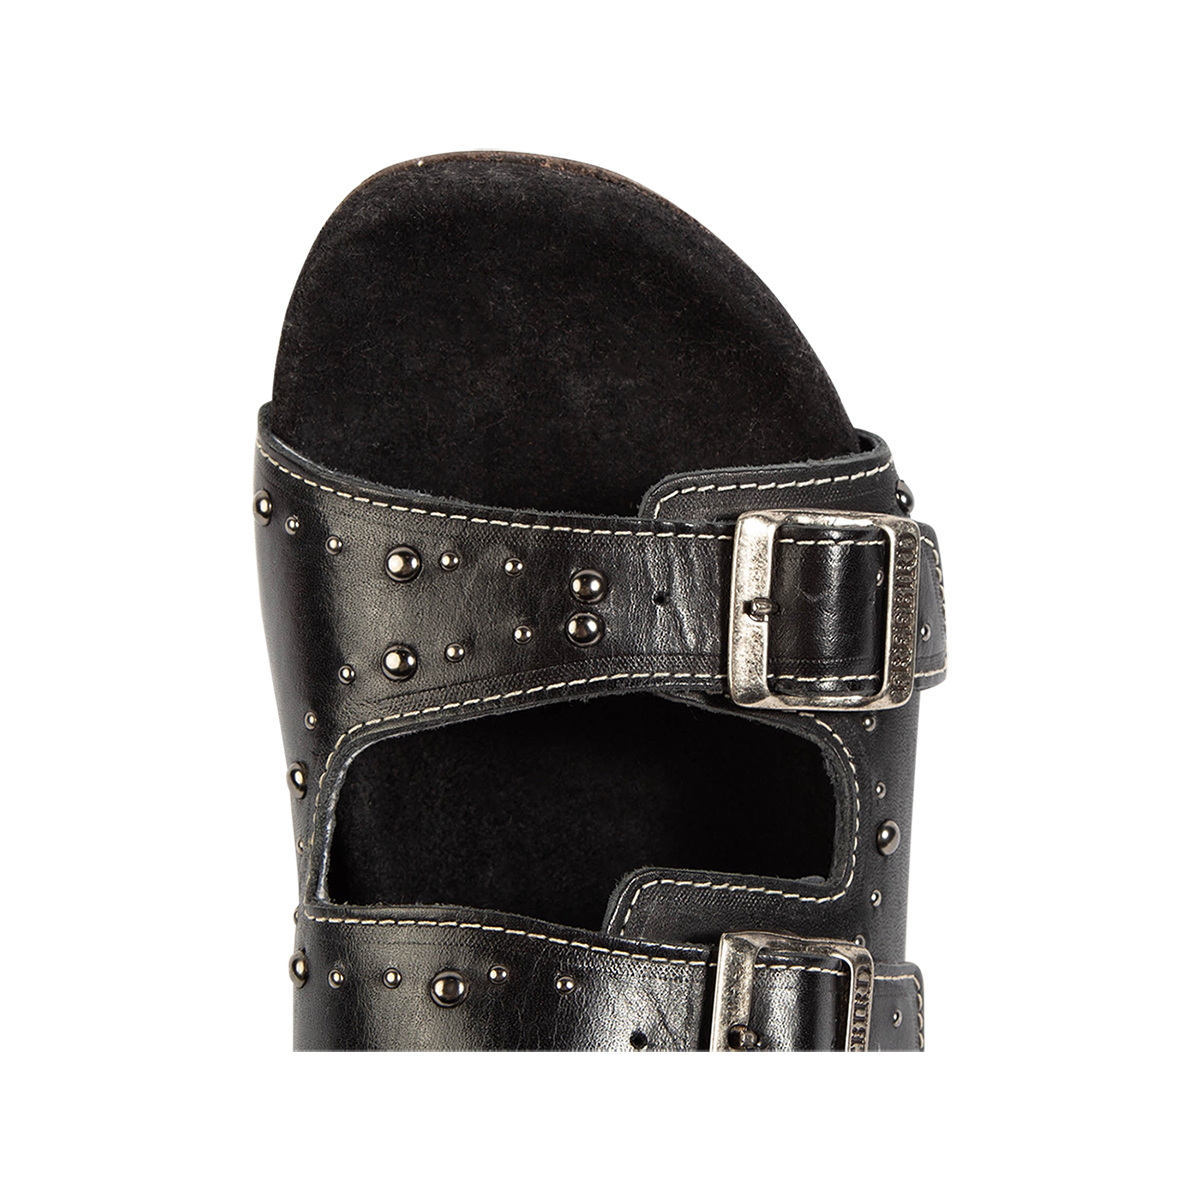 Top view showing a rounded exposed toe bed on FREEBIRD women's Asher black sandal 